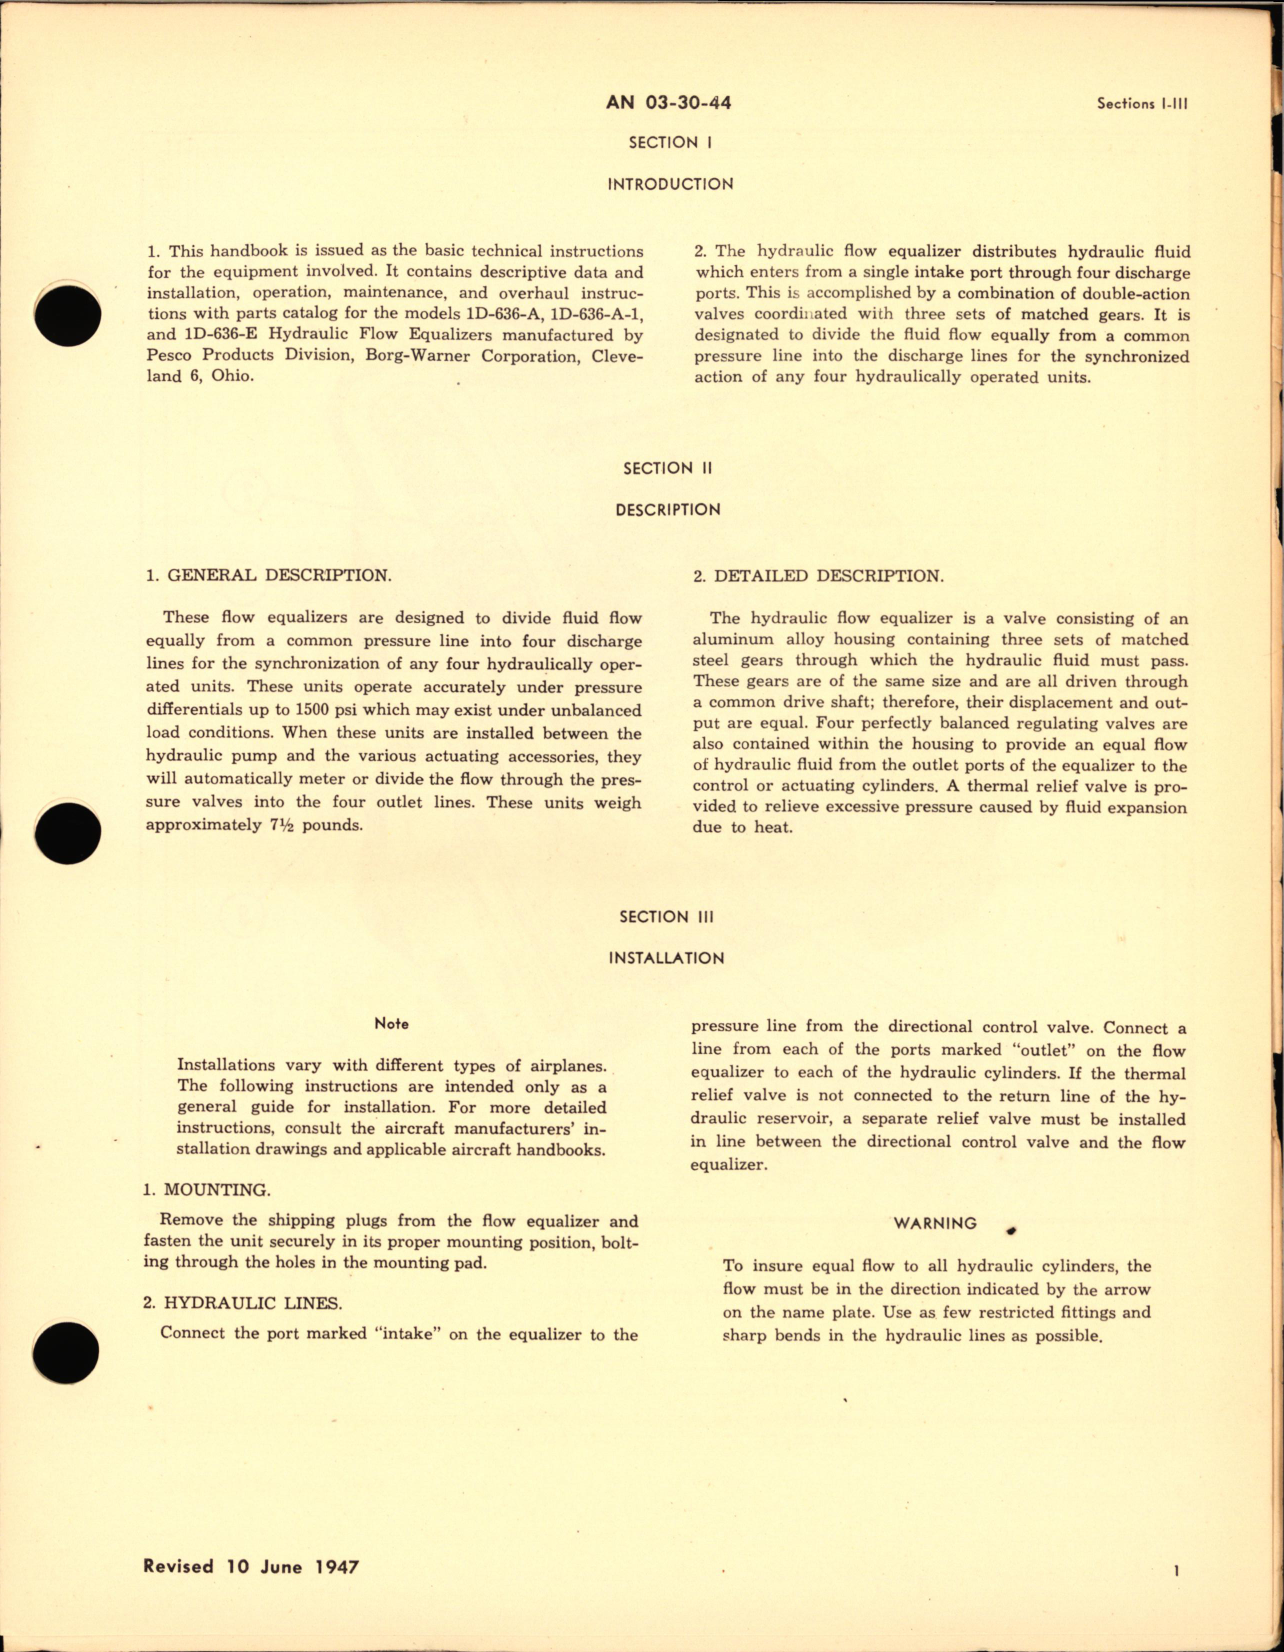 Sample page 5 from AirCorps Library document: Operation, Service and Overhaul Instructions with Parts Catalog for Hydraulic Flow Equalizer